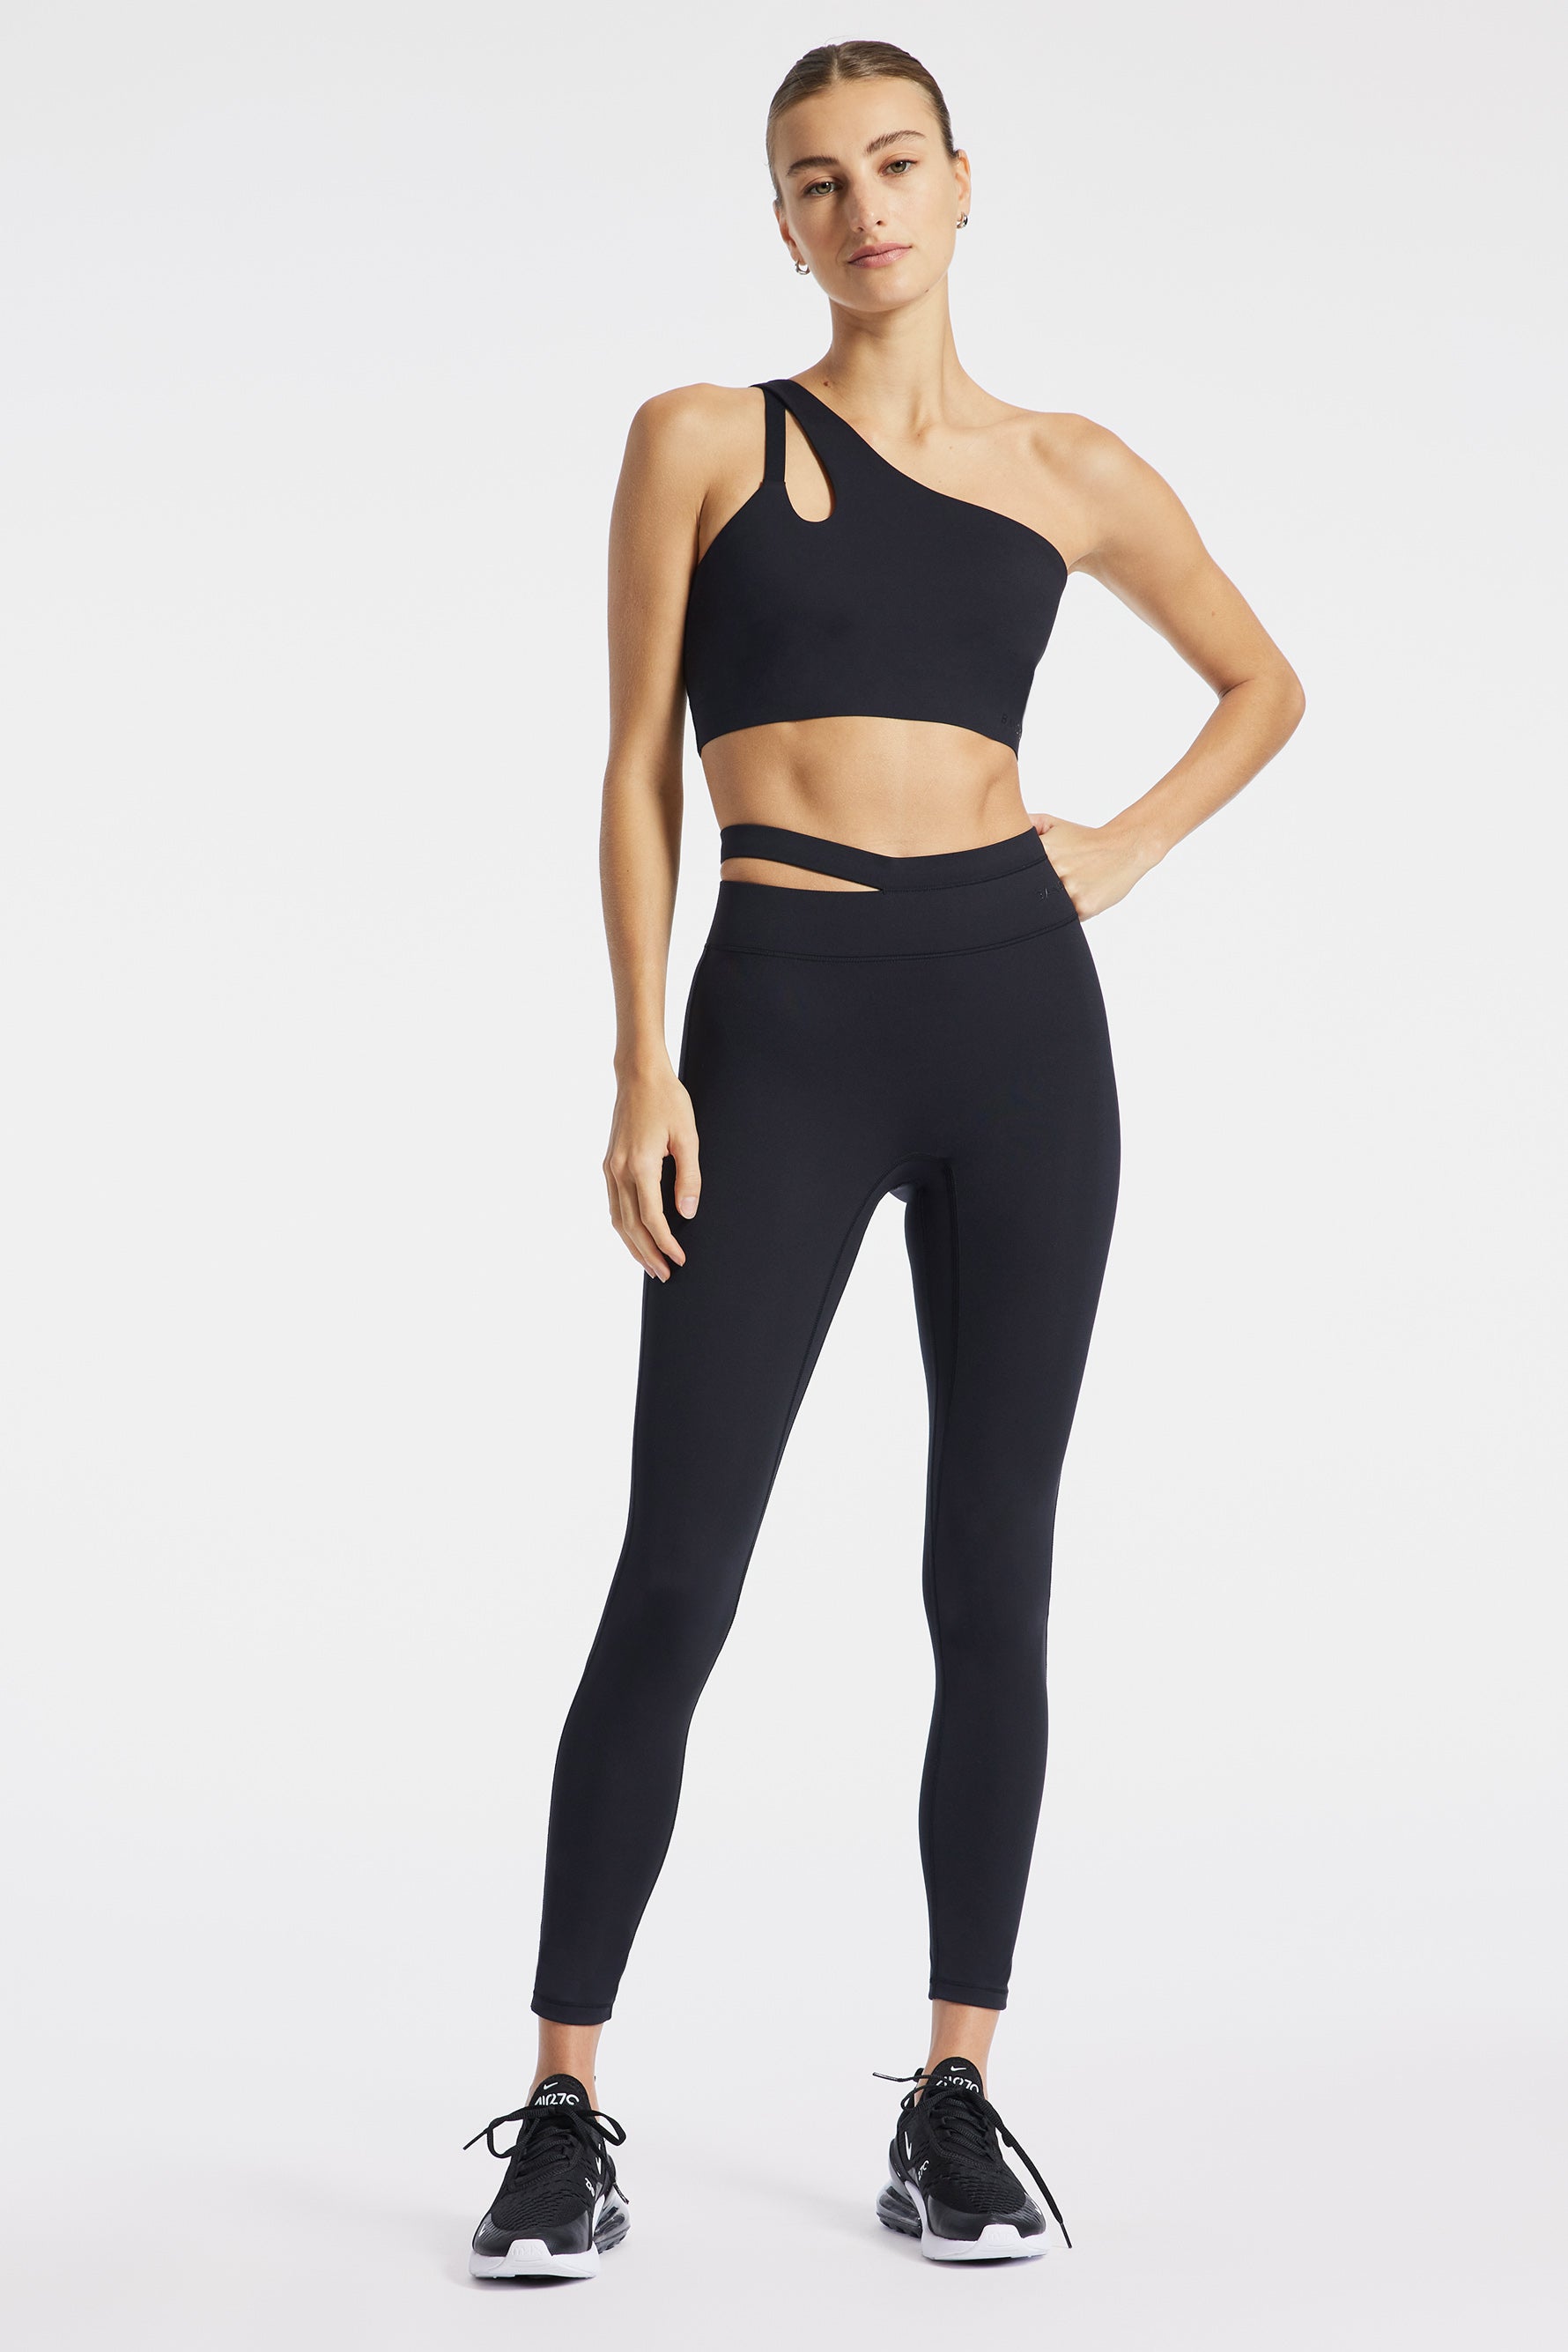 A.L.C. x Bandier High Waisted Legging With Front Zip in Black